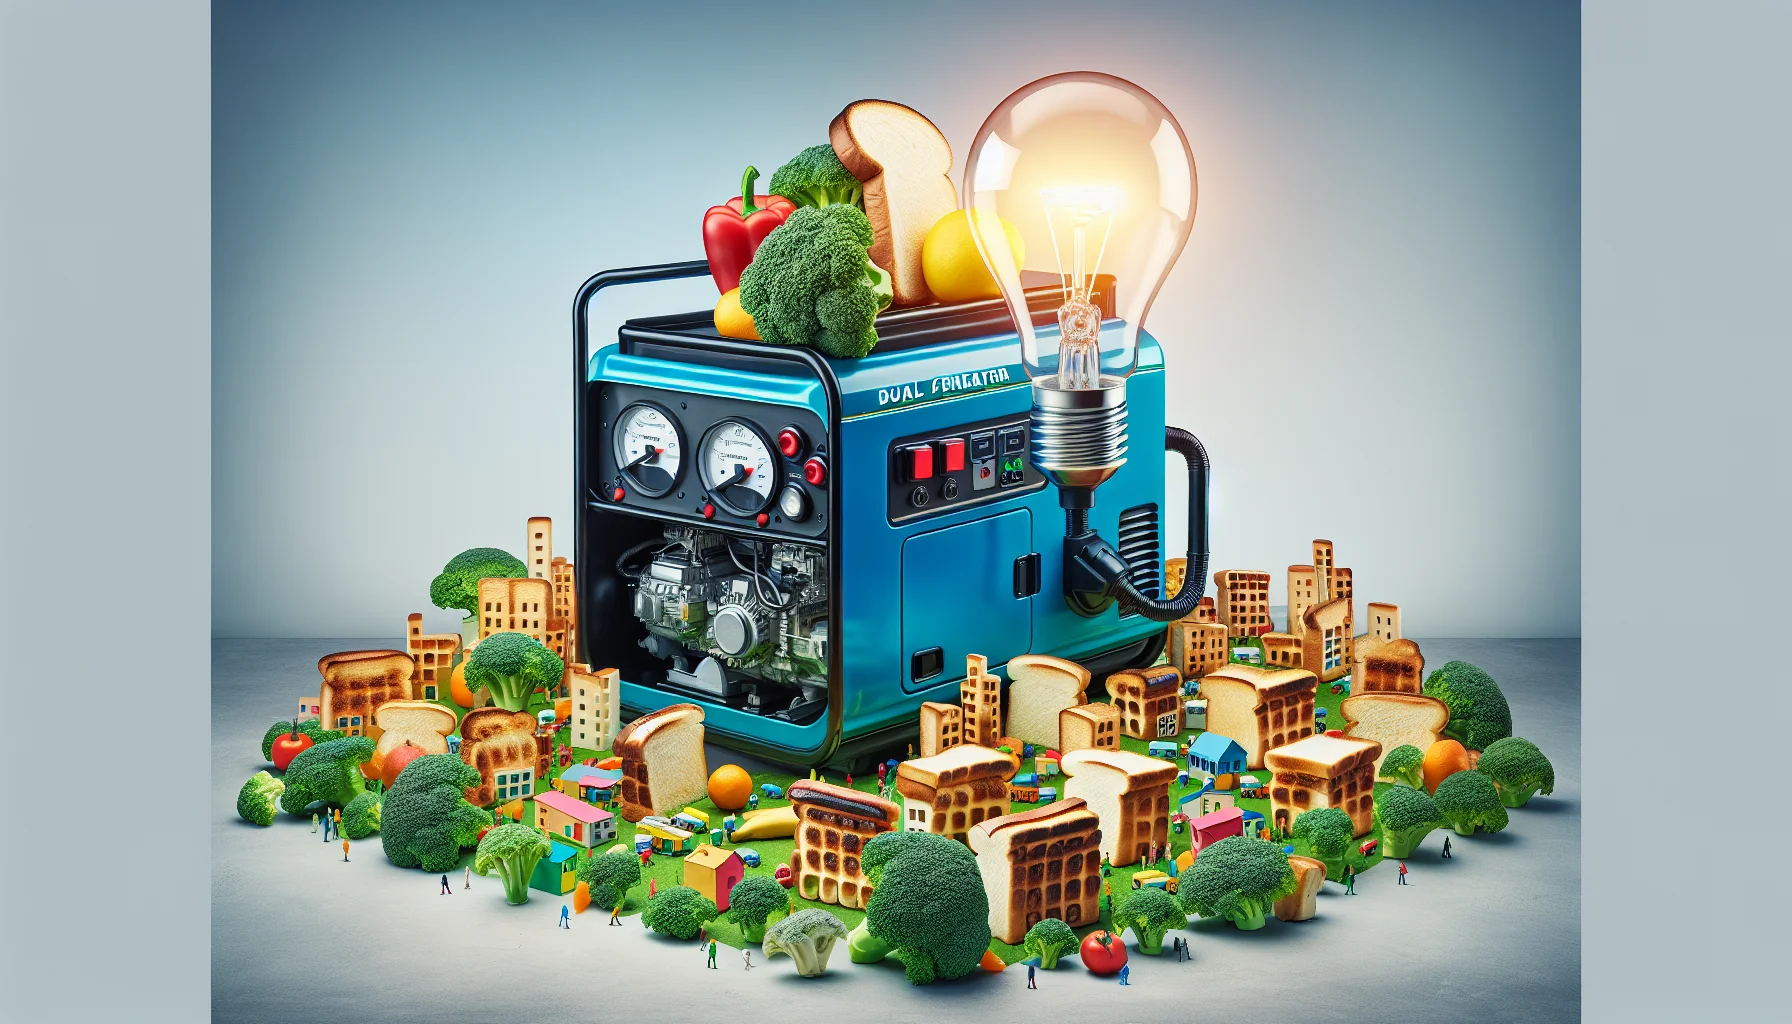 Generate an image of a dual fuel generator painted in bright colors placed in a humorous setting. Maybe it's powering a tiny city made entirely out of toast, where the buildings are slices of toasted bread, the trees are broccoli, and the people are cheerfully made of various fruits. An oversized lightbulb is brightly lit above the city, symbolizing the power provided by the generator. This unique setup is designed to amuse and inspire viewers to consider generating their own electricity.